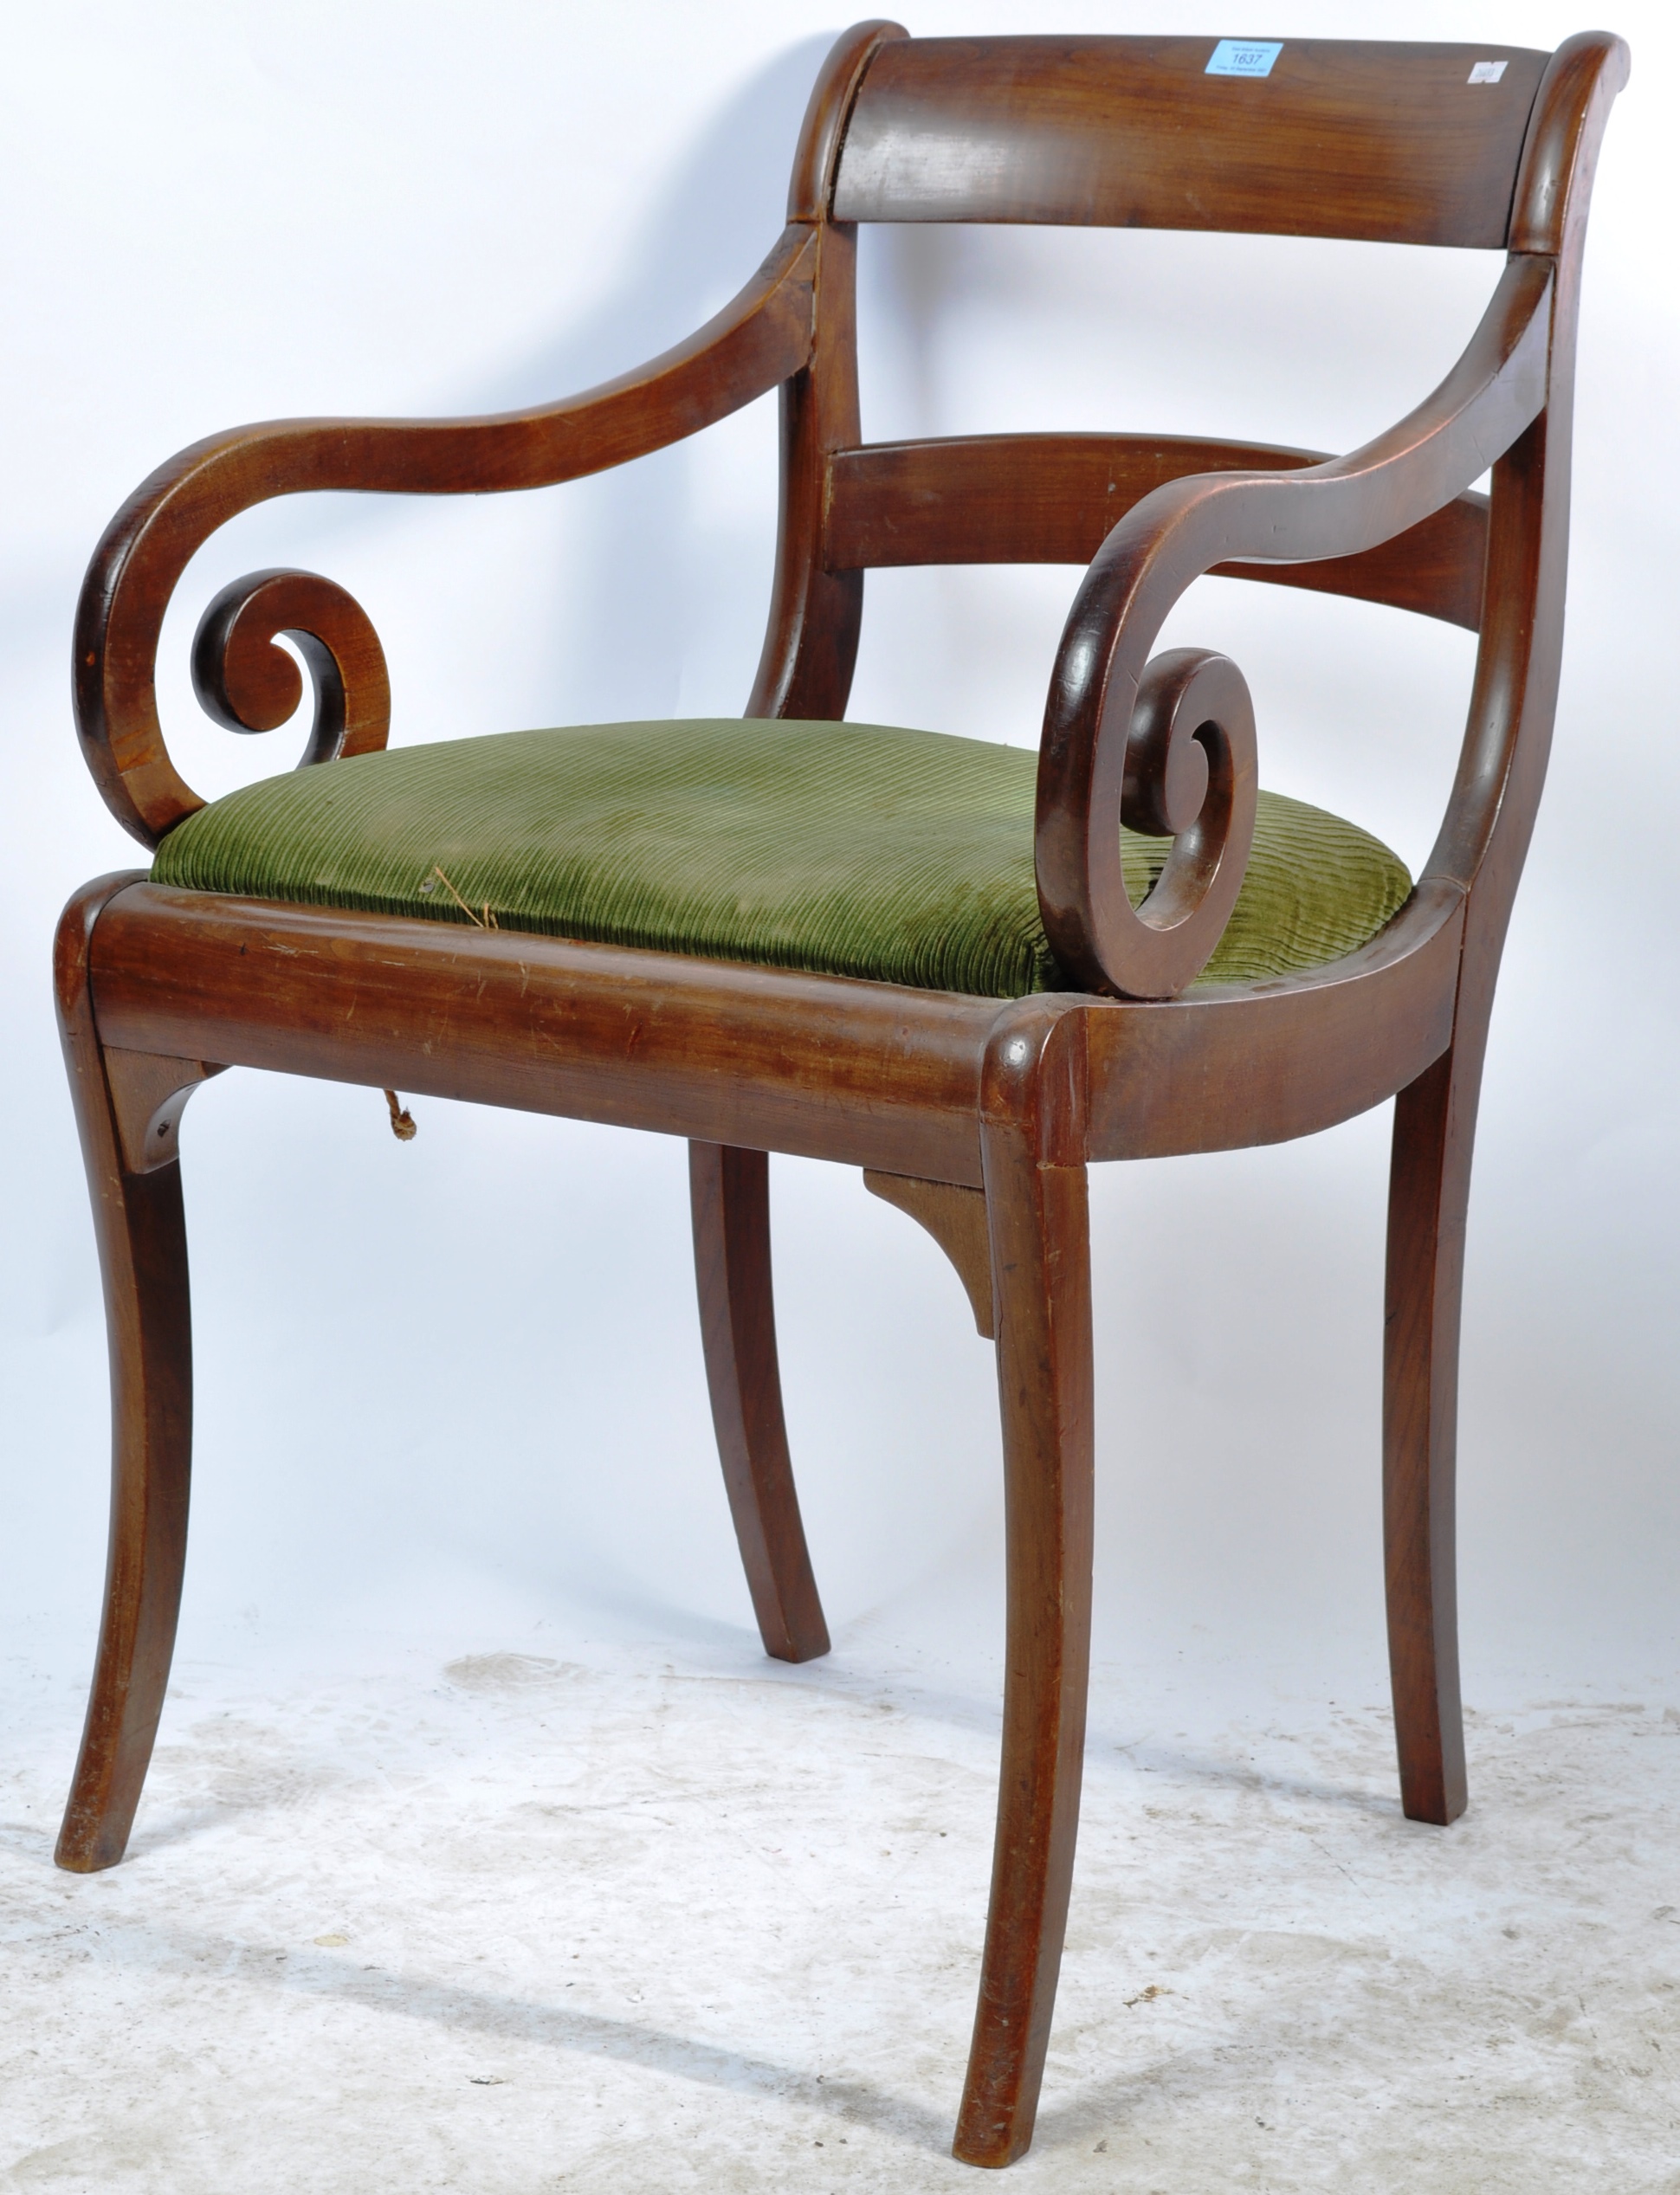 EARLY 19TH CENTURY REGENCY MAHOGANY SCROLLED ARM CHAIR - Image 2 of 8